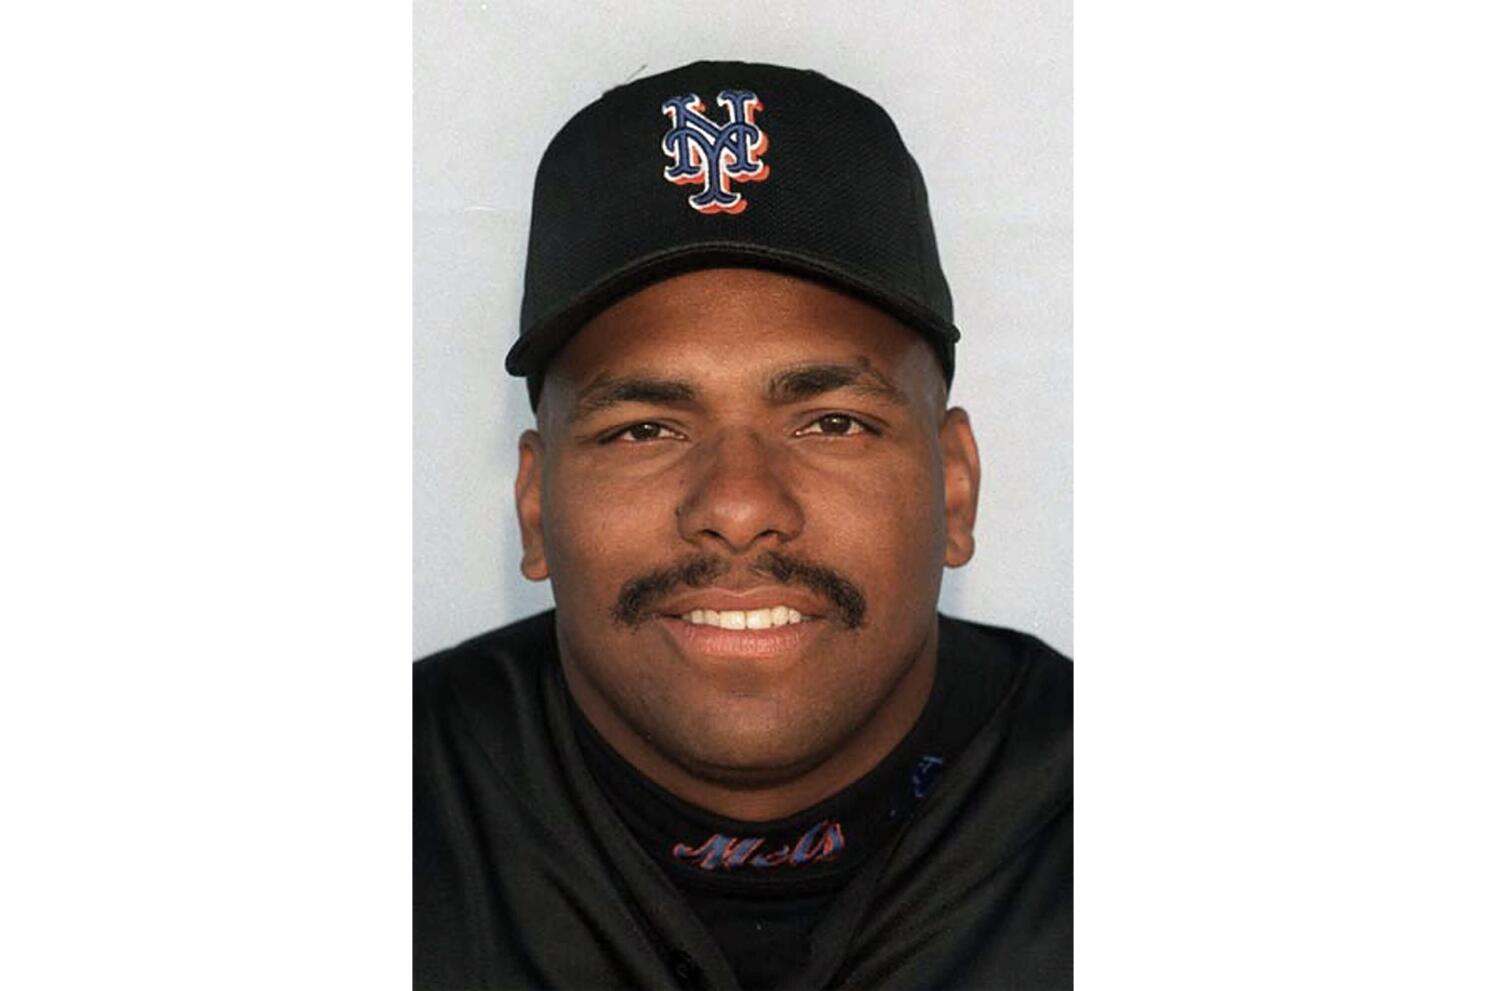 What is 'Bobby Bonilla Day?